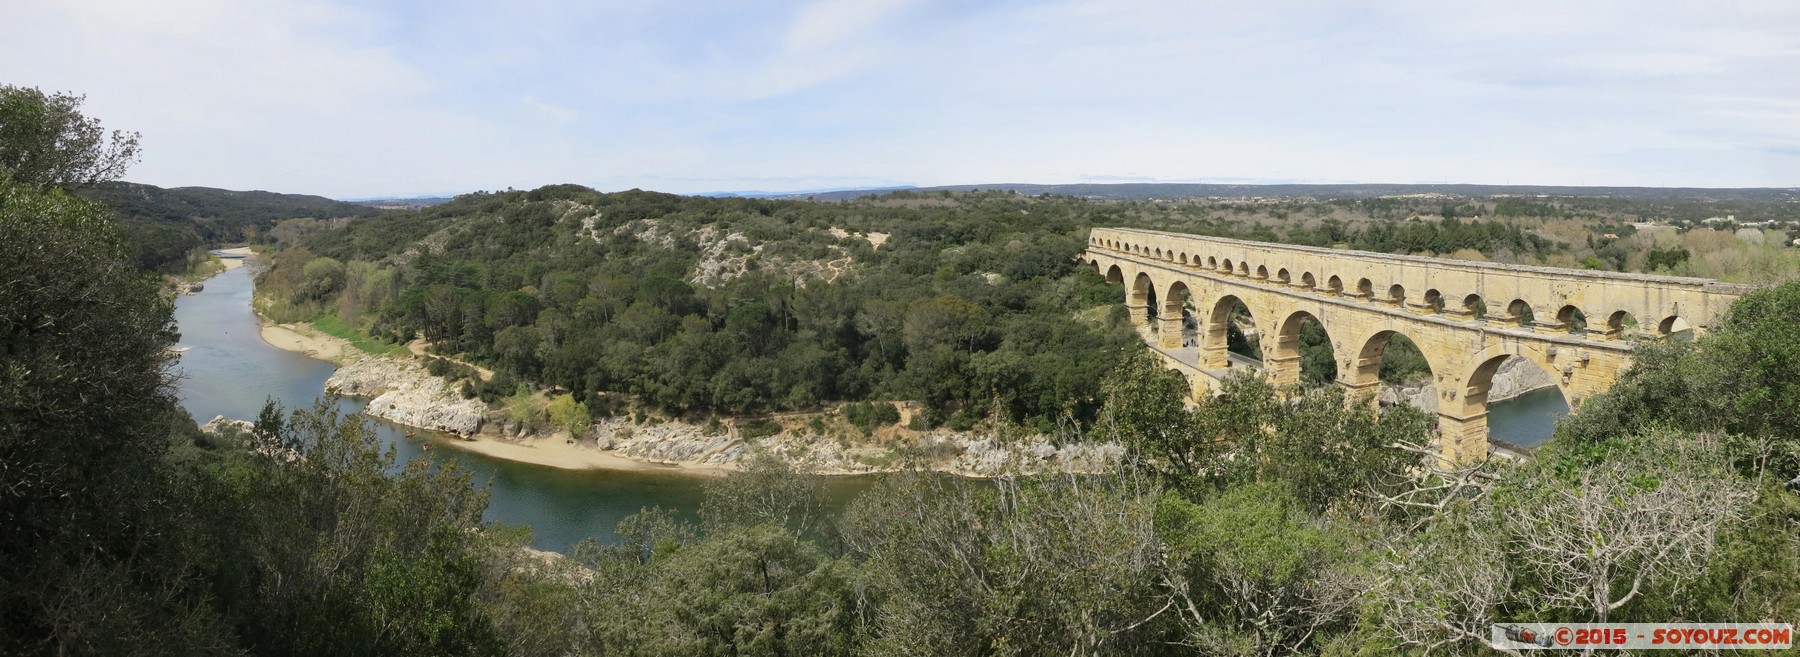 Pont du Gard - Panorama
Stitched Panorama
Mots-clés: FRA France geo:lat=43.94611010 geo:lon=4.53564763 geotagged Languedoc-Roussillon Vers-Pont-du-Gard Pont Pont du Gard Ruines Romain patrimoine unesco Riviere panorama